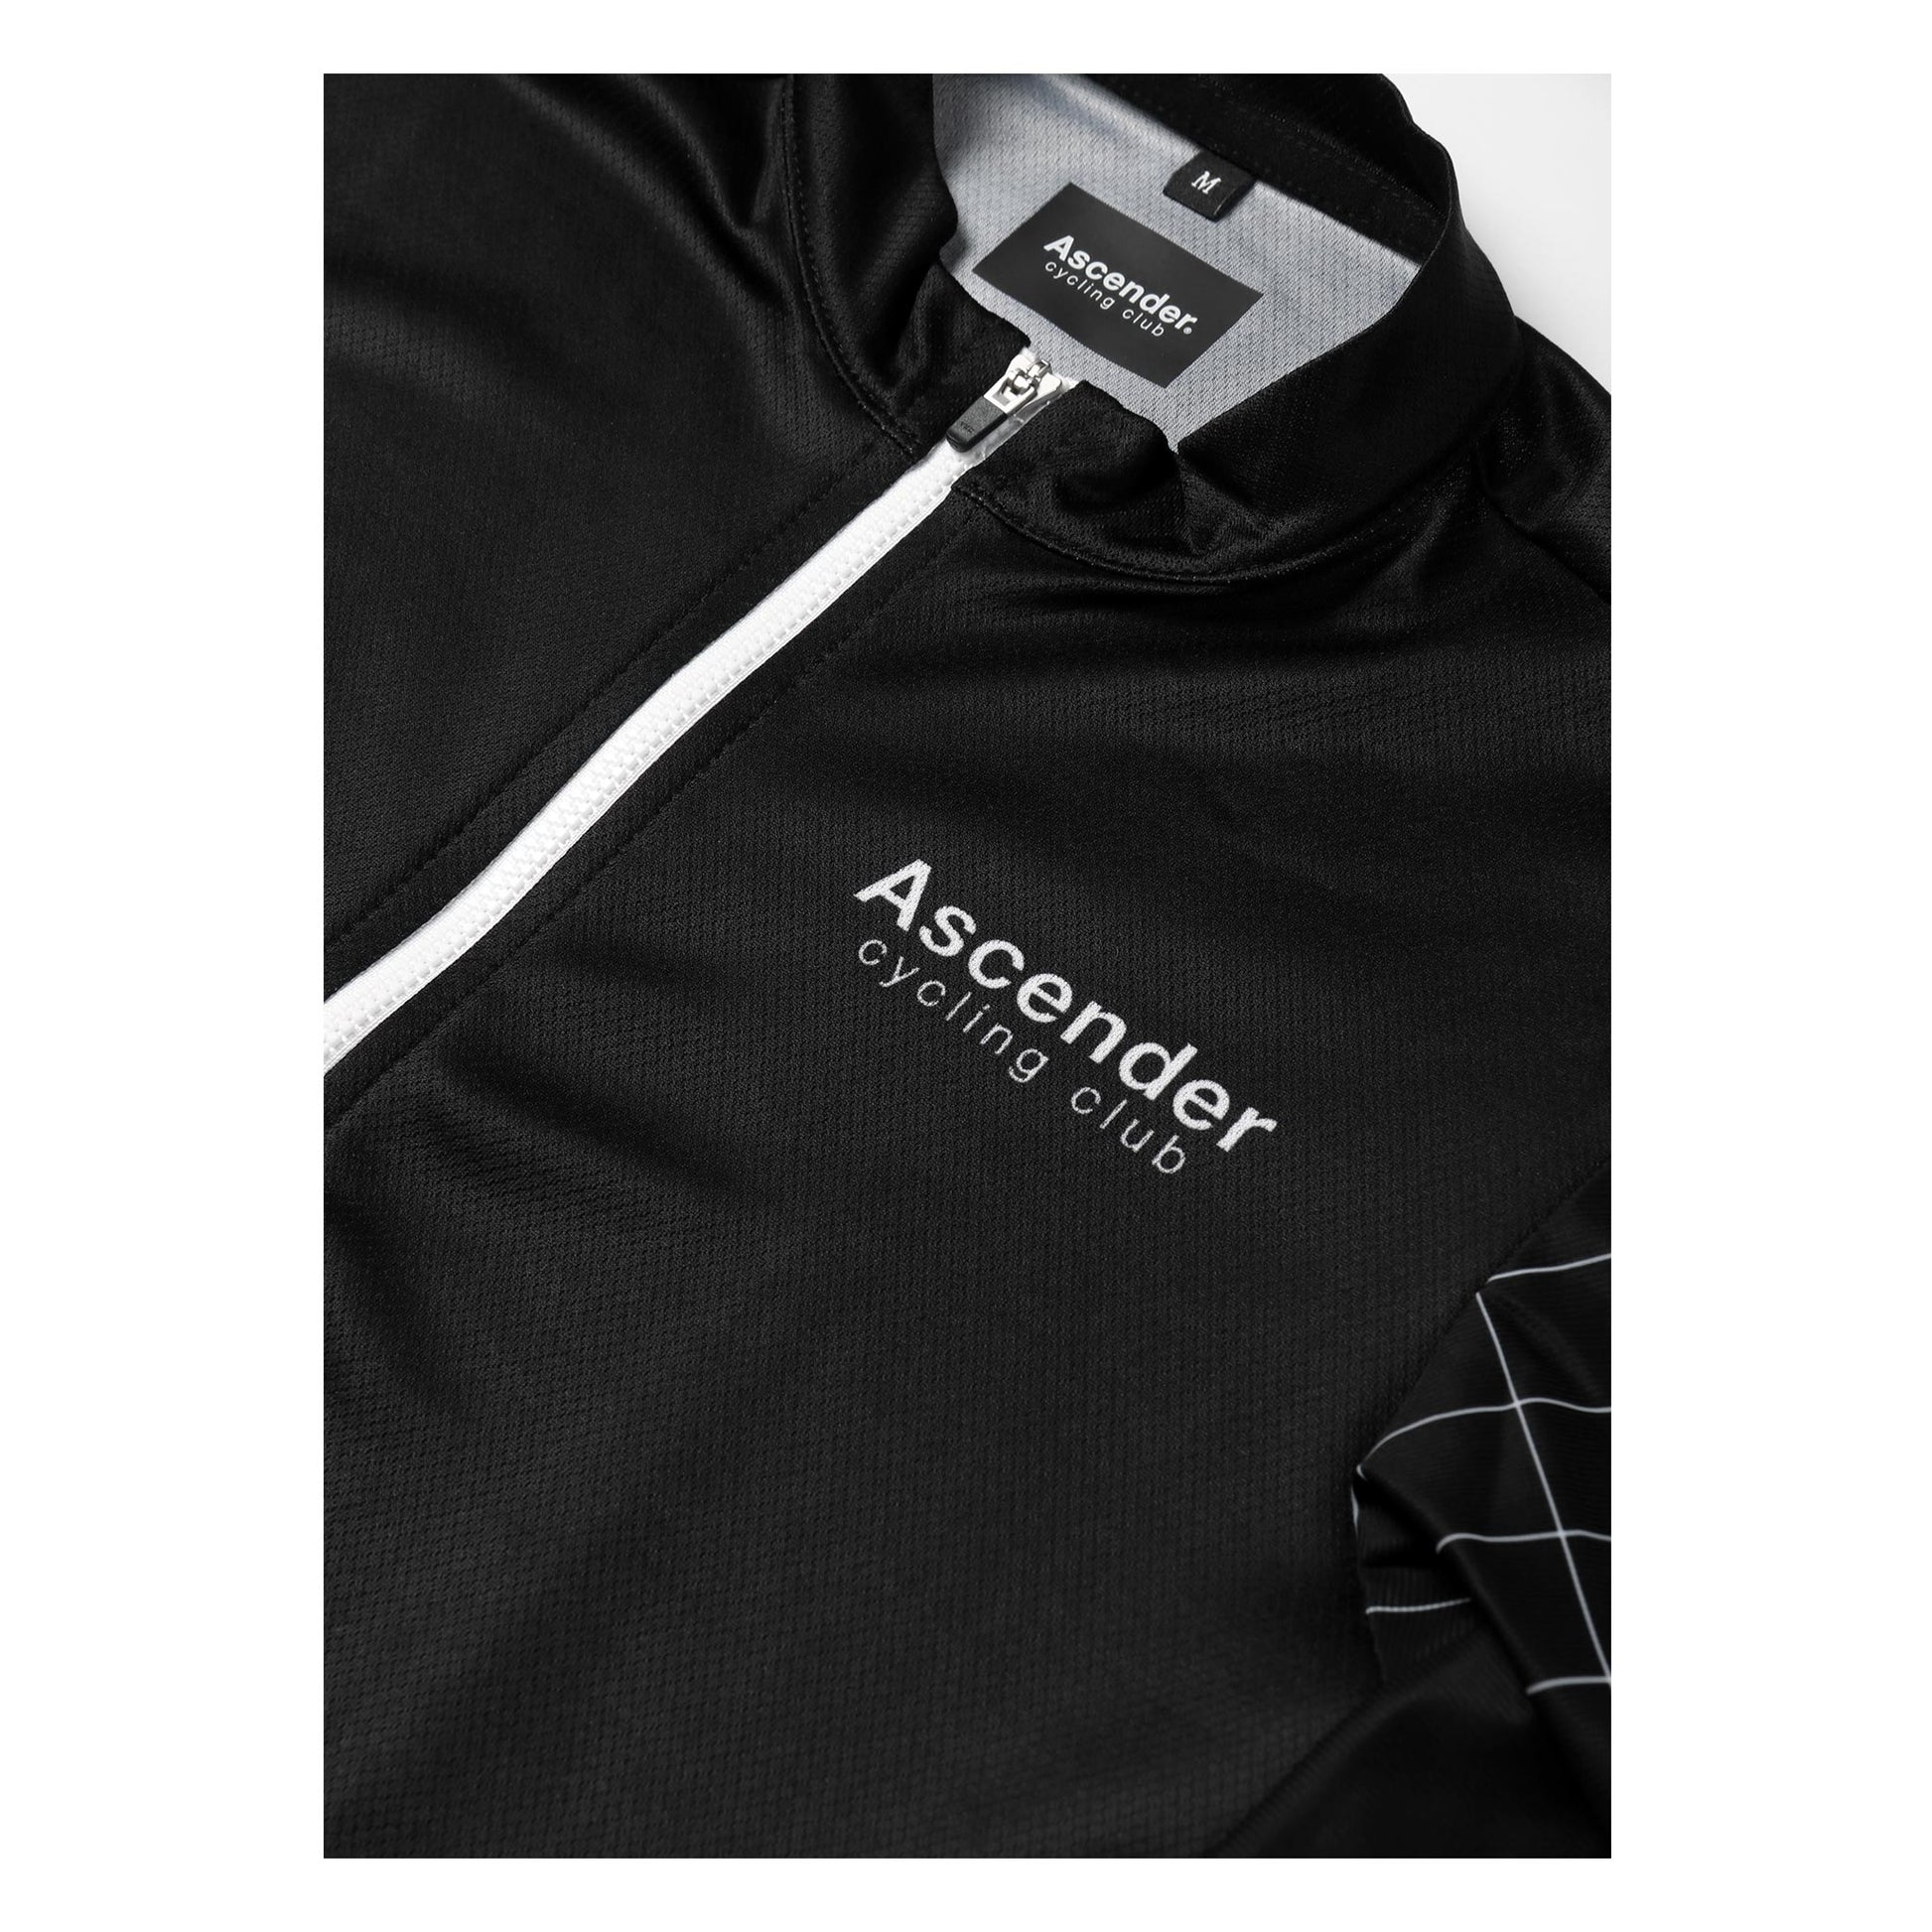 Supernova Sustainable Short Sleeves Cycling Jersey Black from Ascender Cycling Club Zürich Switzerland Front Logo View